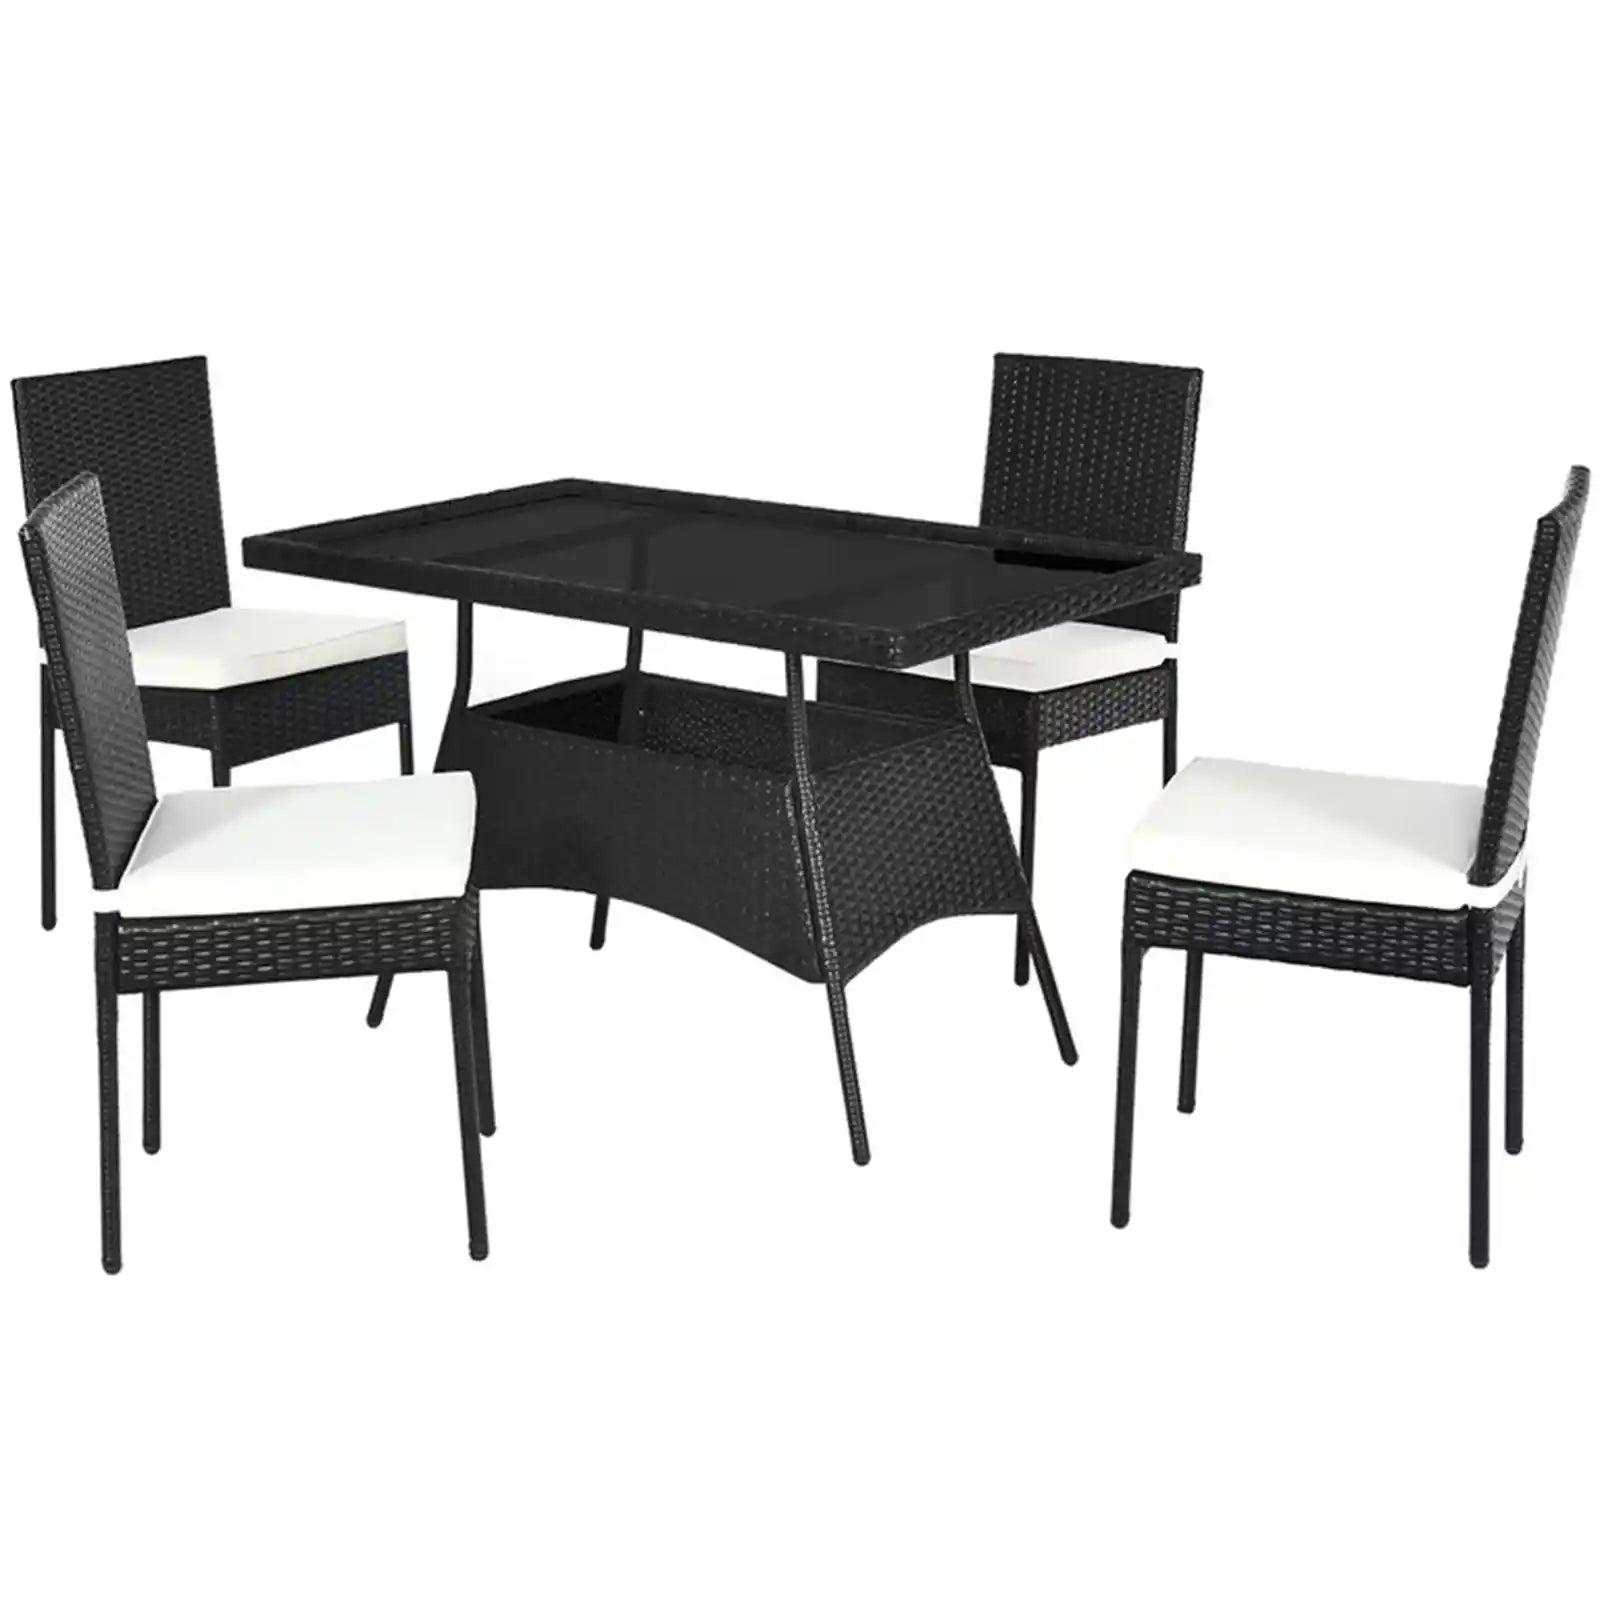 5 Pieces Patio Dining Set Rattan Wicker Chairs and Table with Glass Top